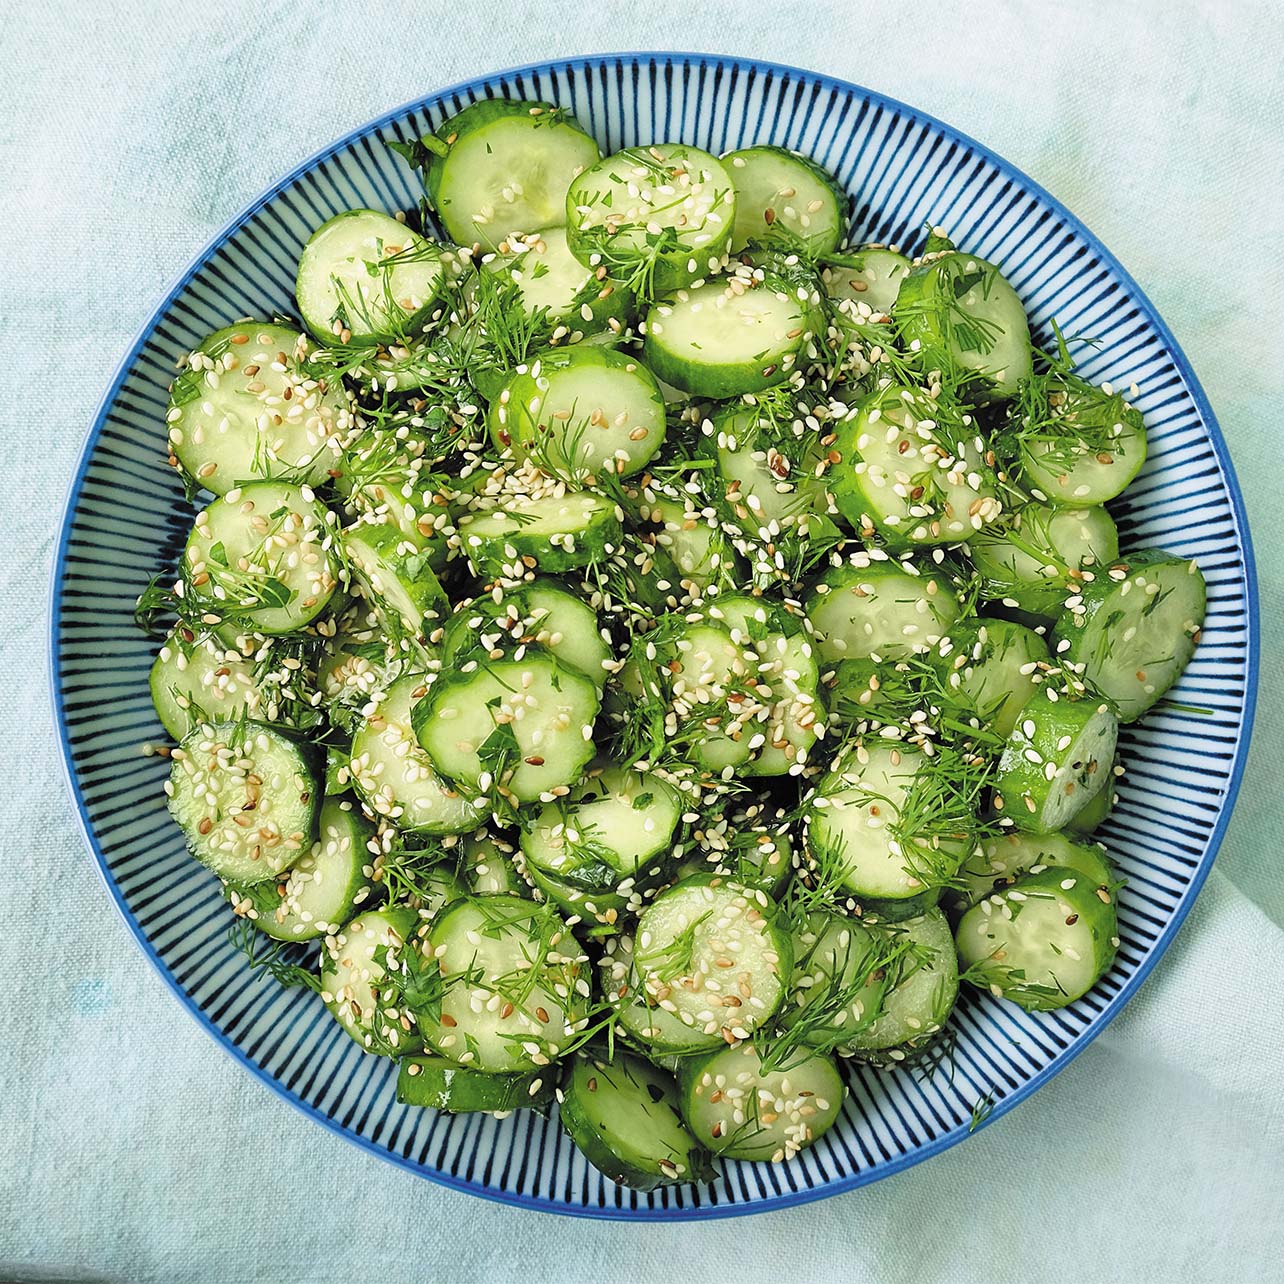 photo of a chopped cucumber salad with sesame seeds, dill and parsley